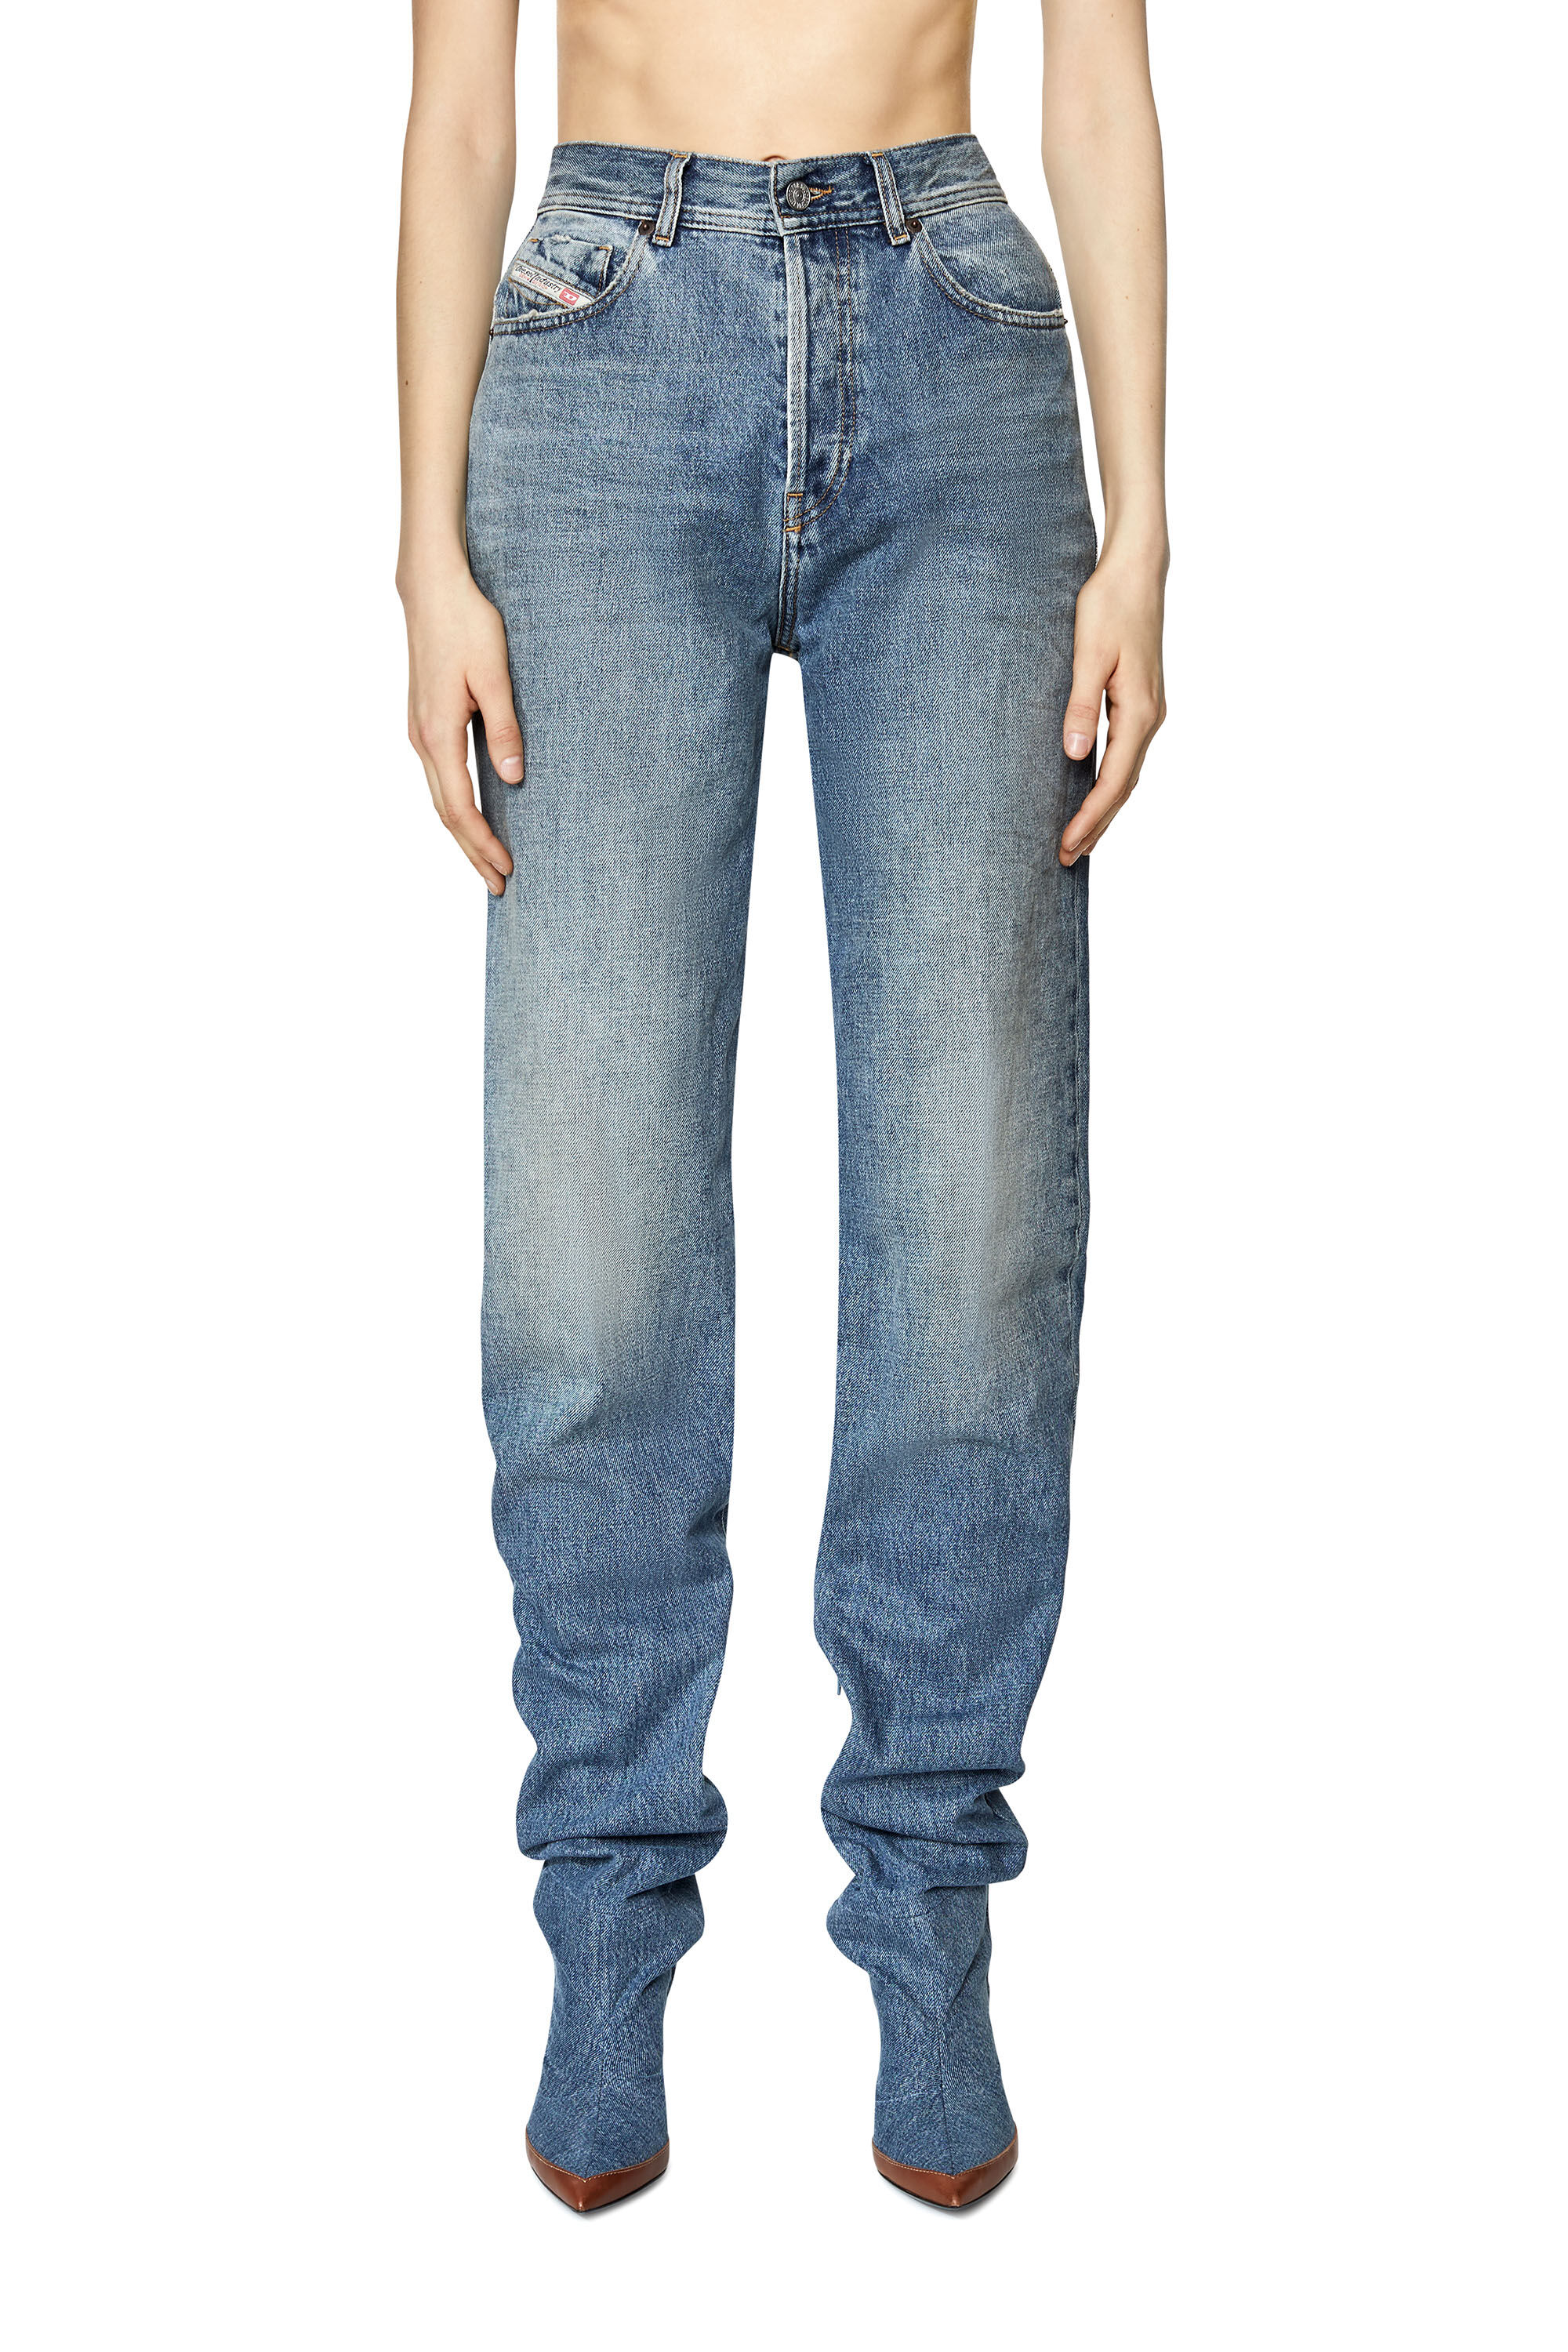 Straight Medium blue Woman Jeans with denim boots: 1956 007A7 | Diesel